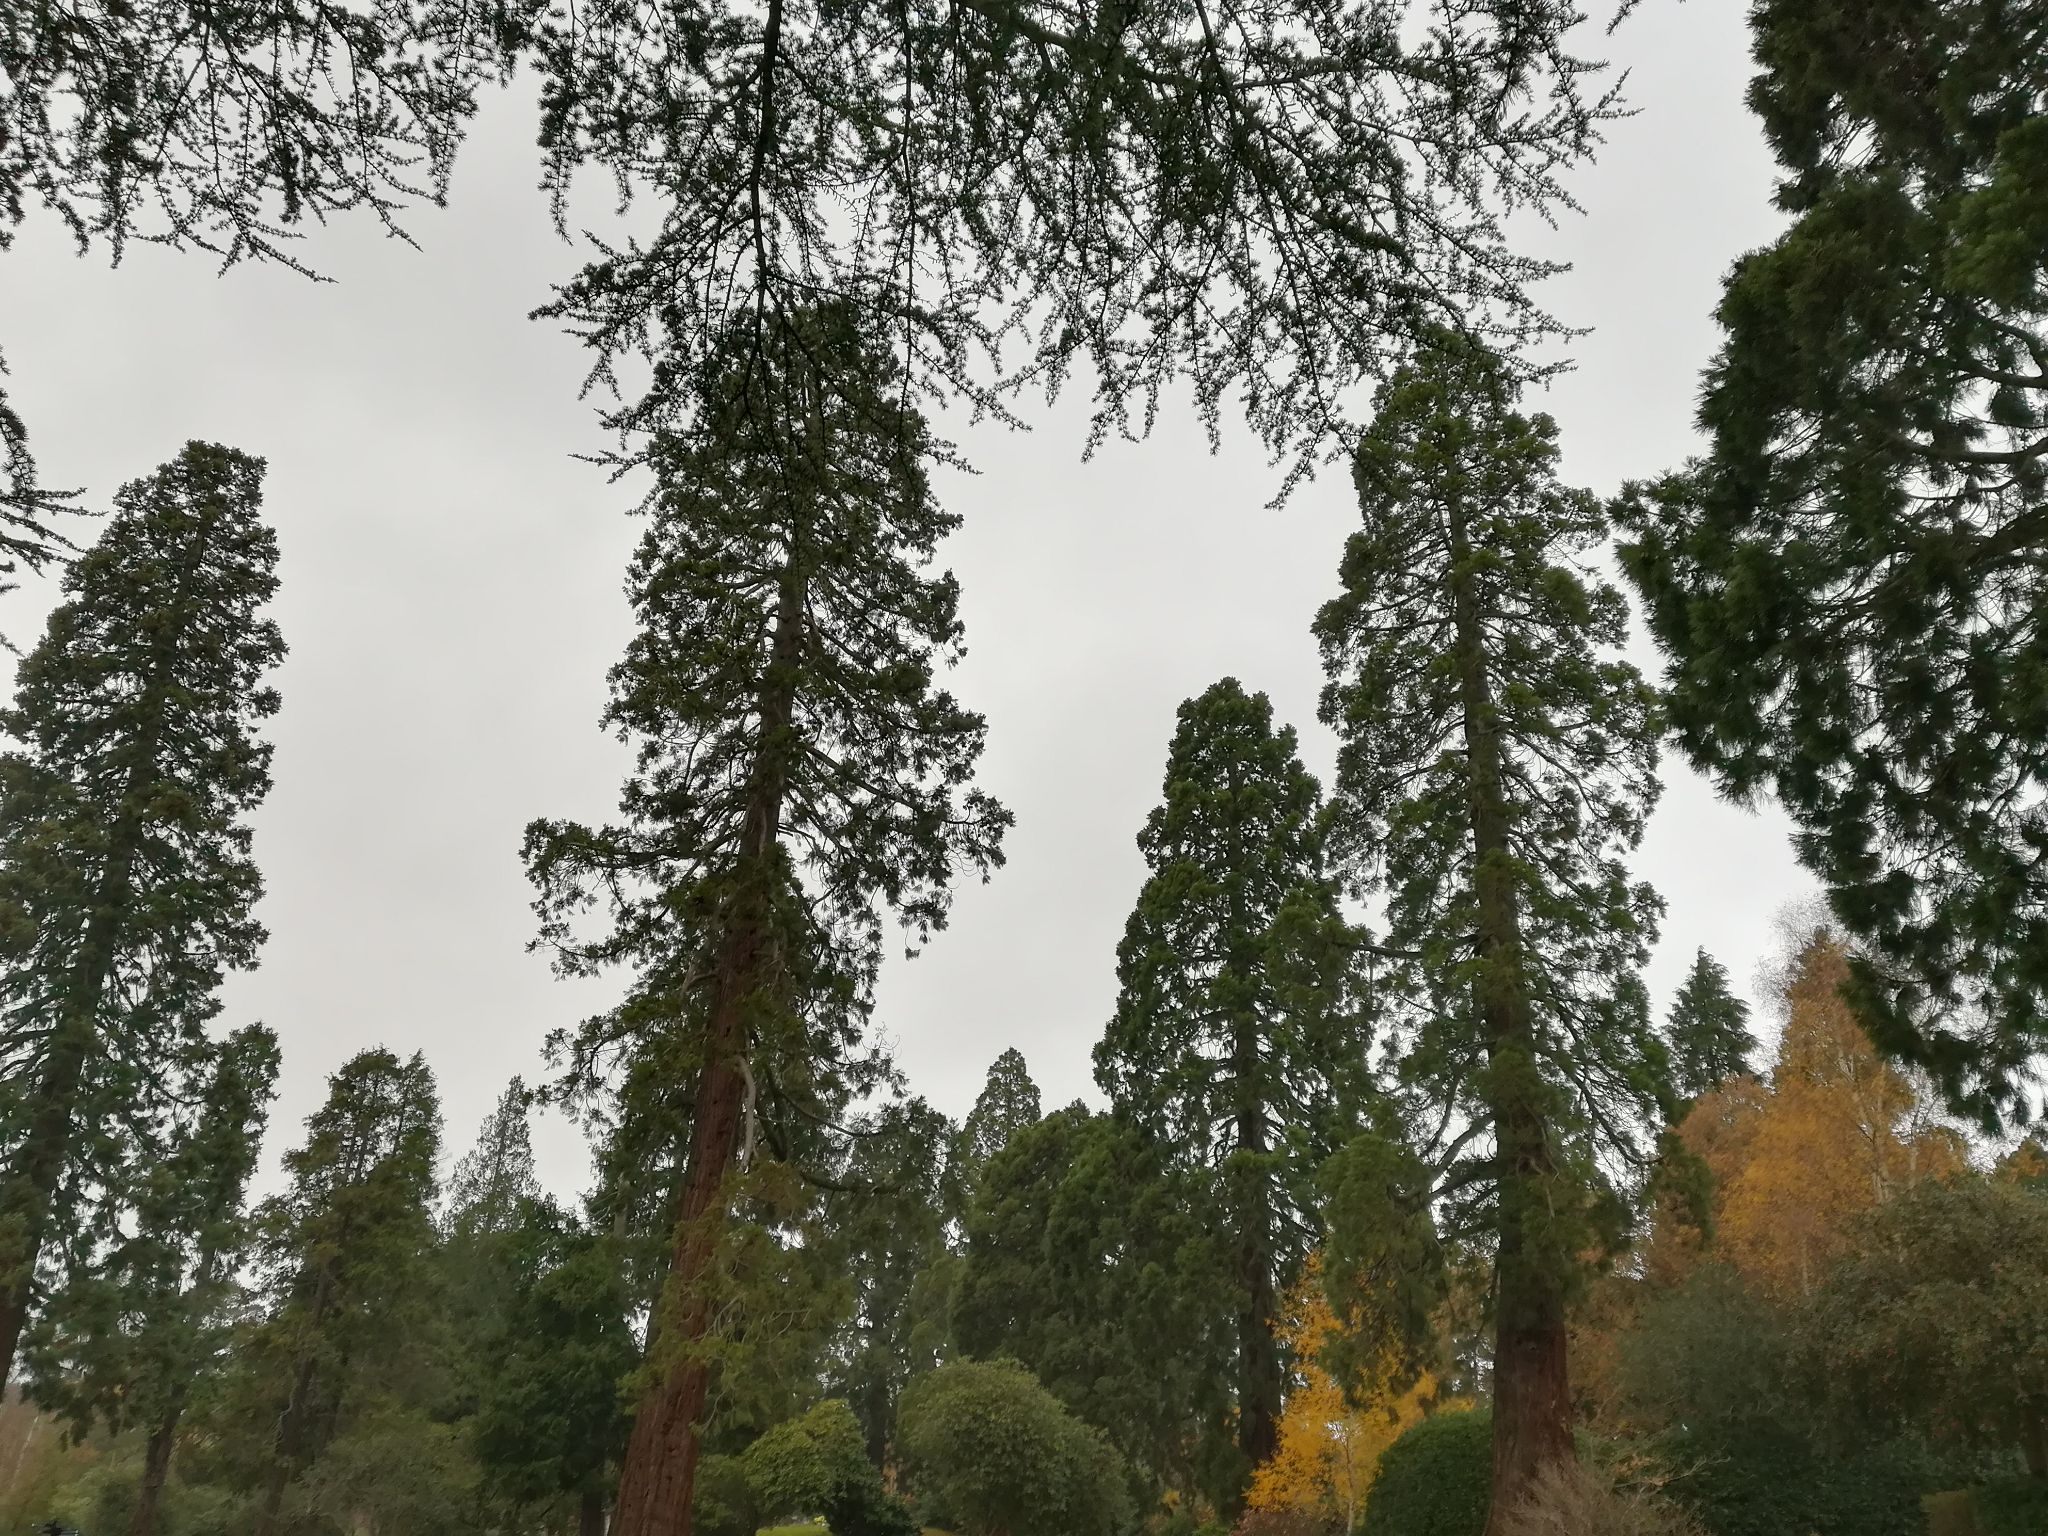 Britain's largest cemetery is planted with majestic Redwood trees that can grow up to 200 ft (MEE/Indlieb Farazi Saber)